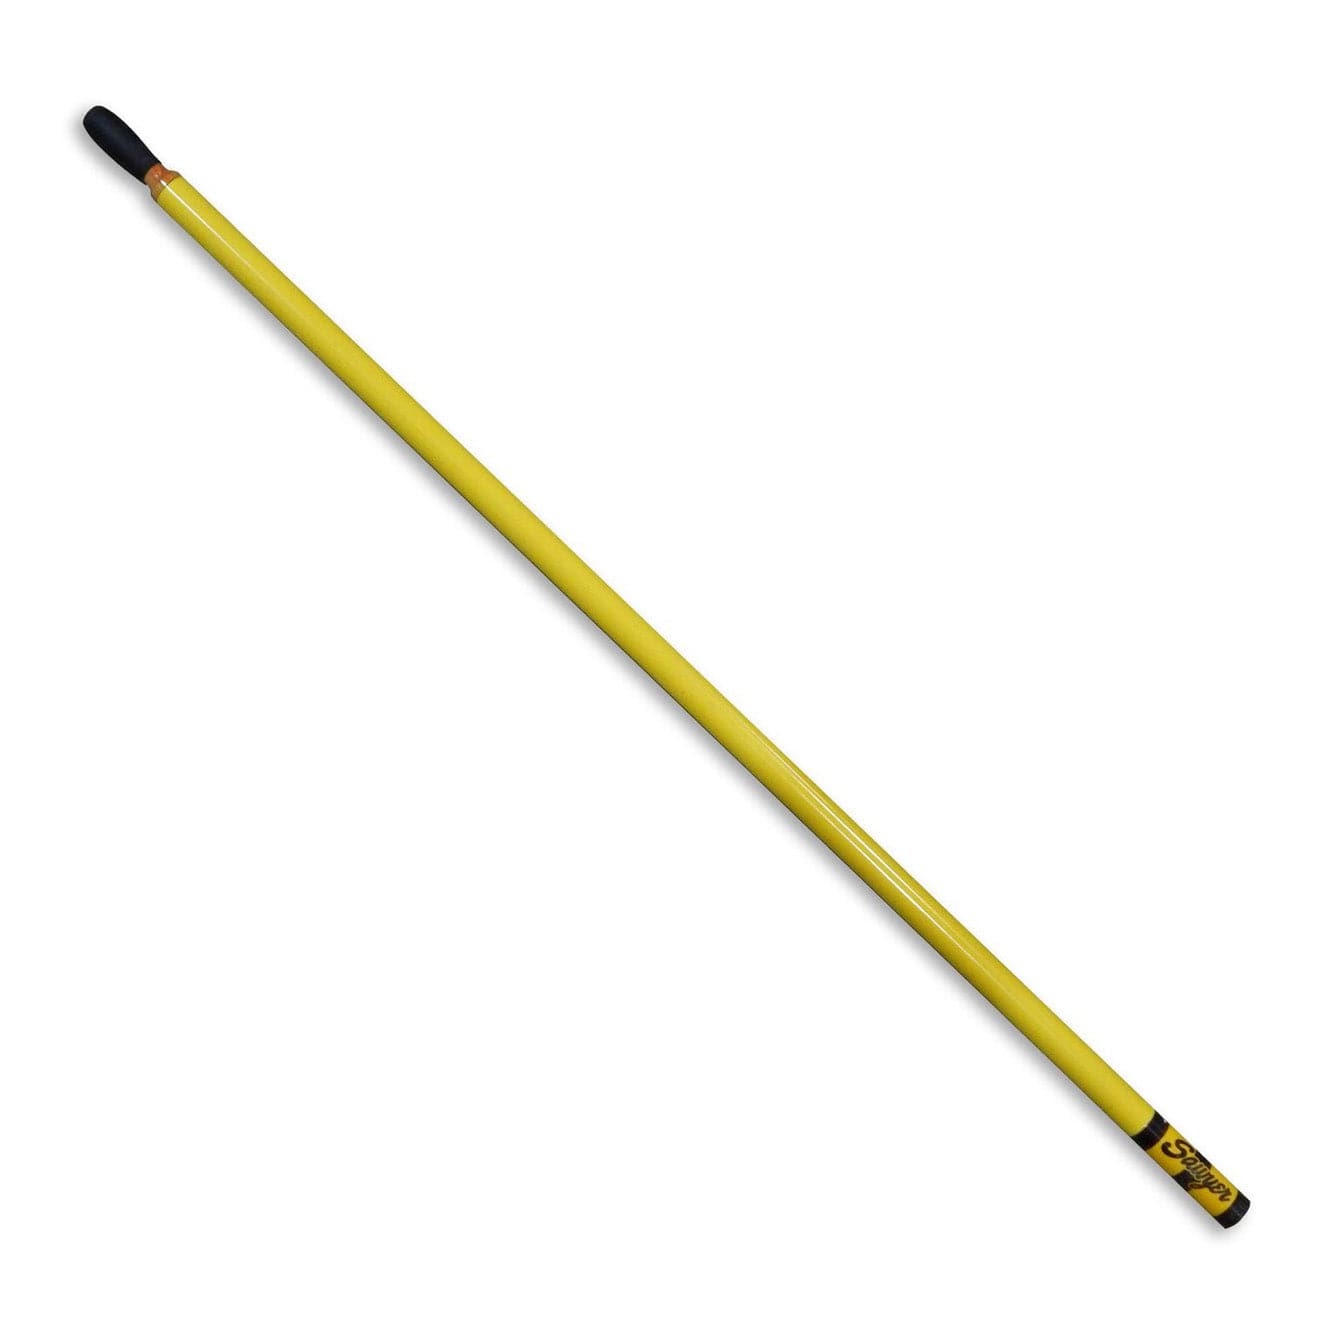 Featuring the Polecat Oar - Bare Shaft & Counter Balanced oar manufactured by Sawyer shown here from a third angle.